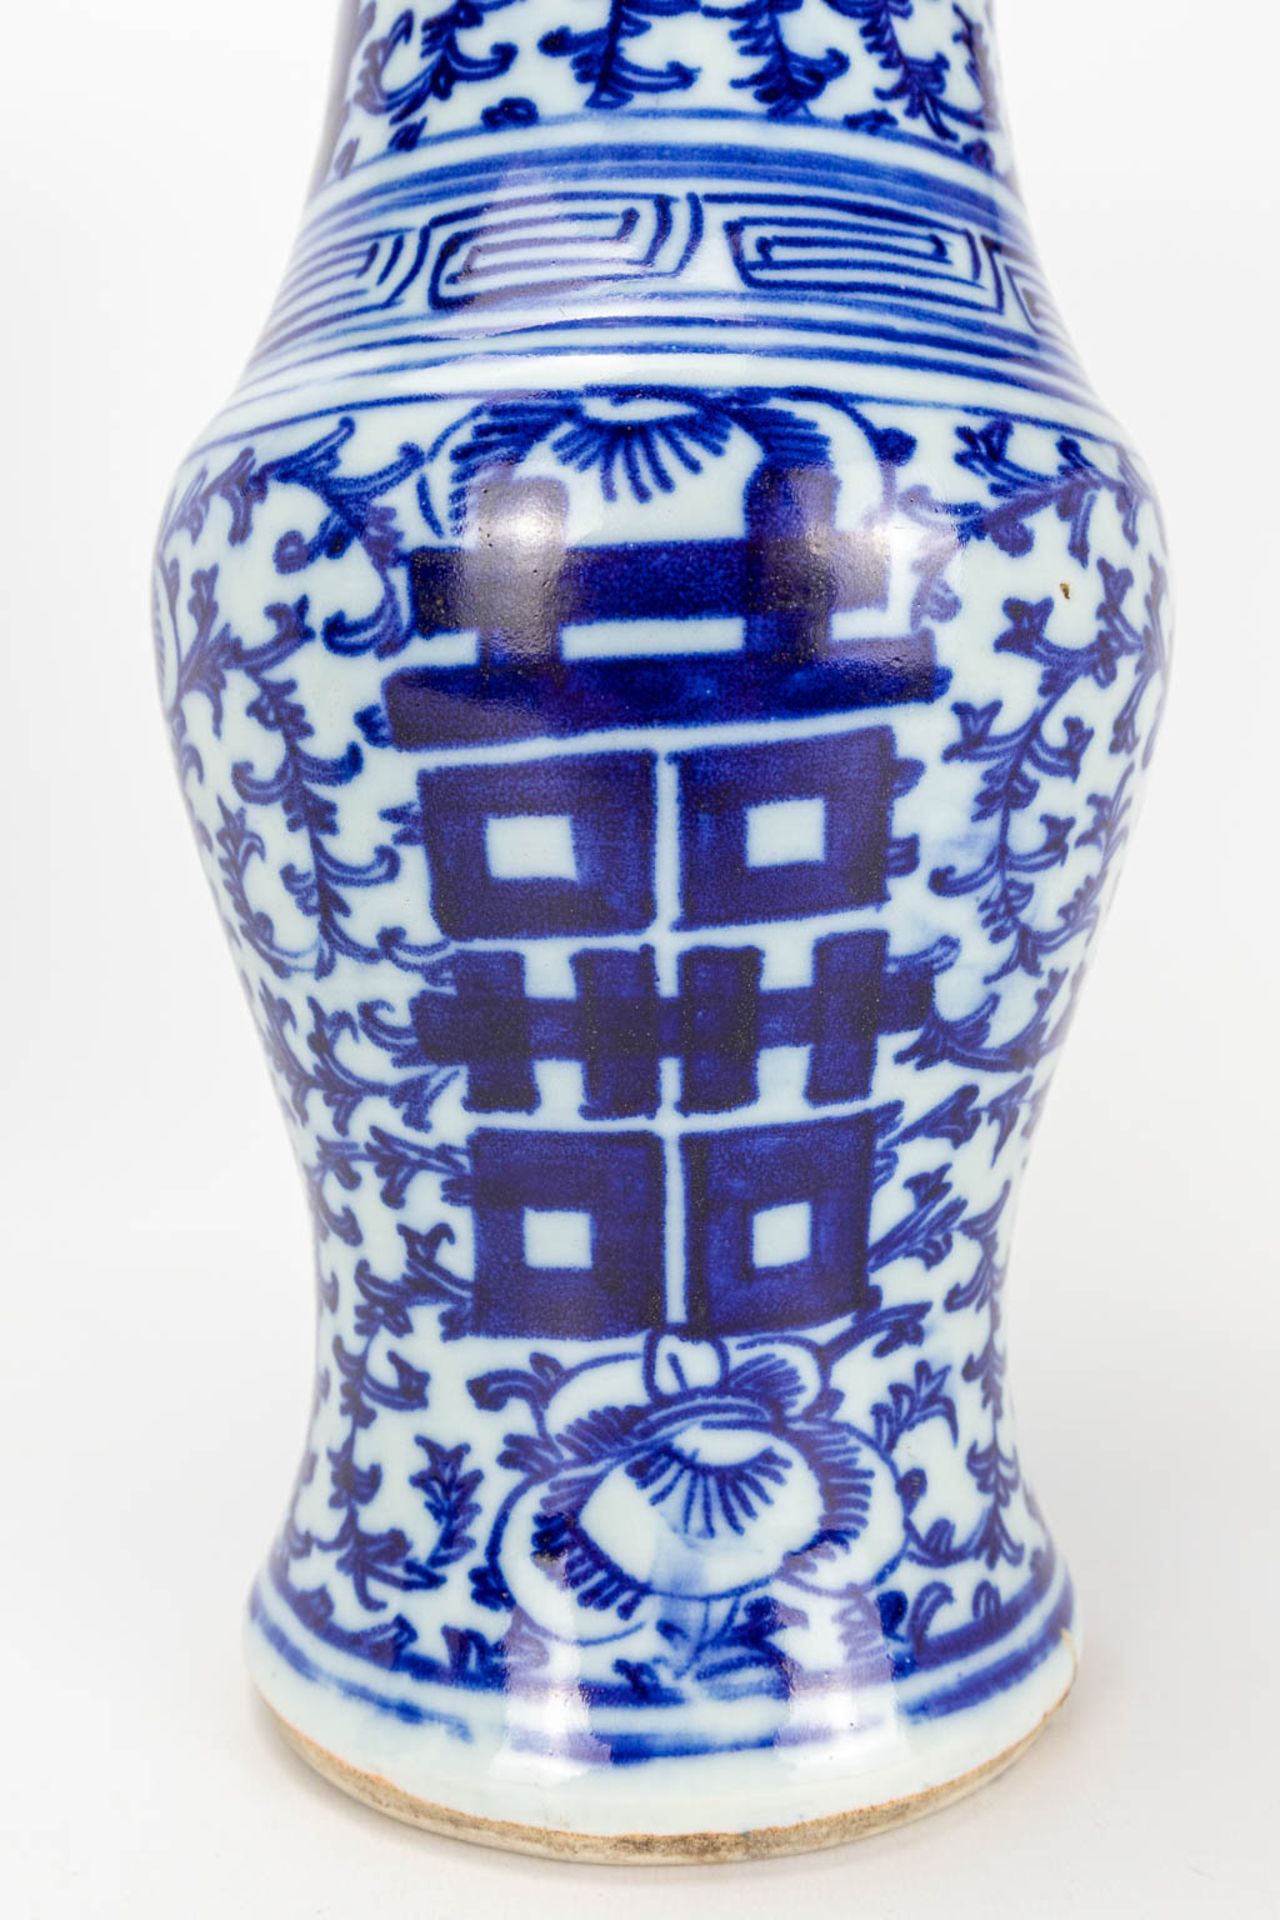 A pair of vases made of Chinese blue-white porcelain with 'Double Xi-sign' symbols of happiness. - Image 7 of 13